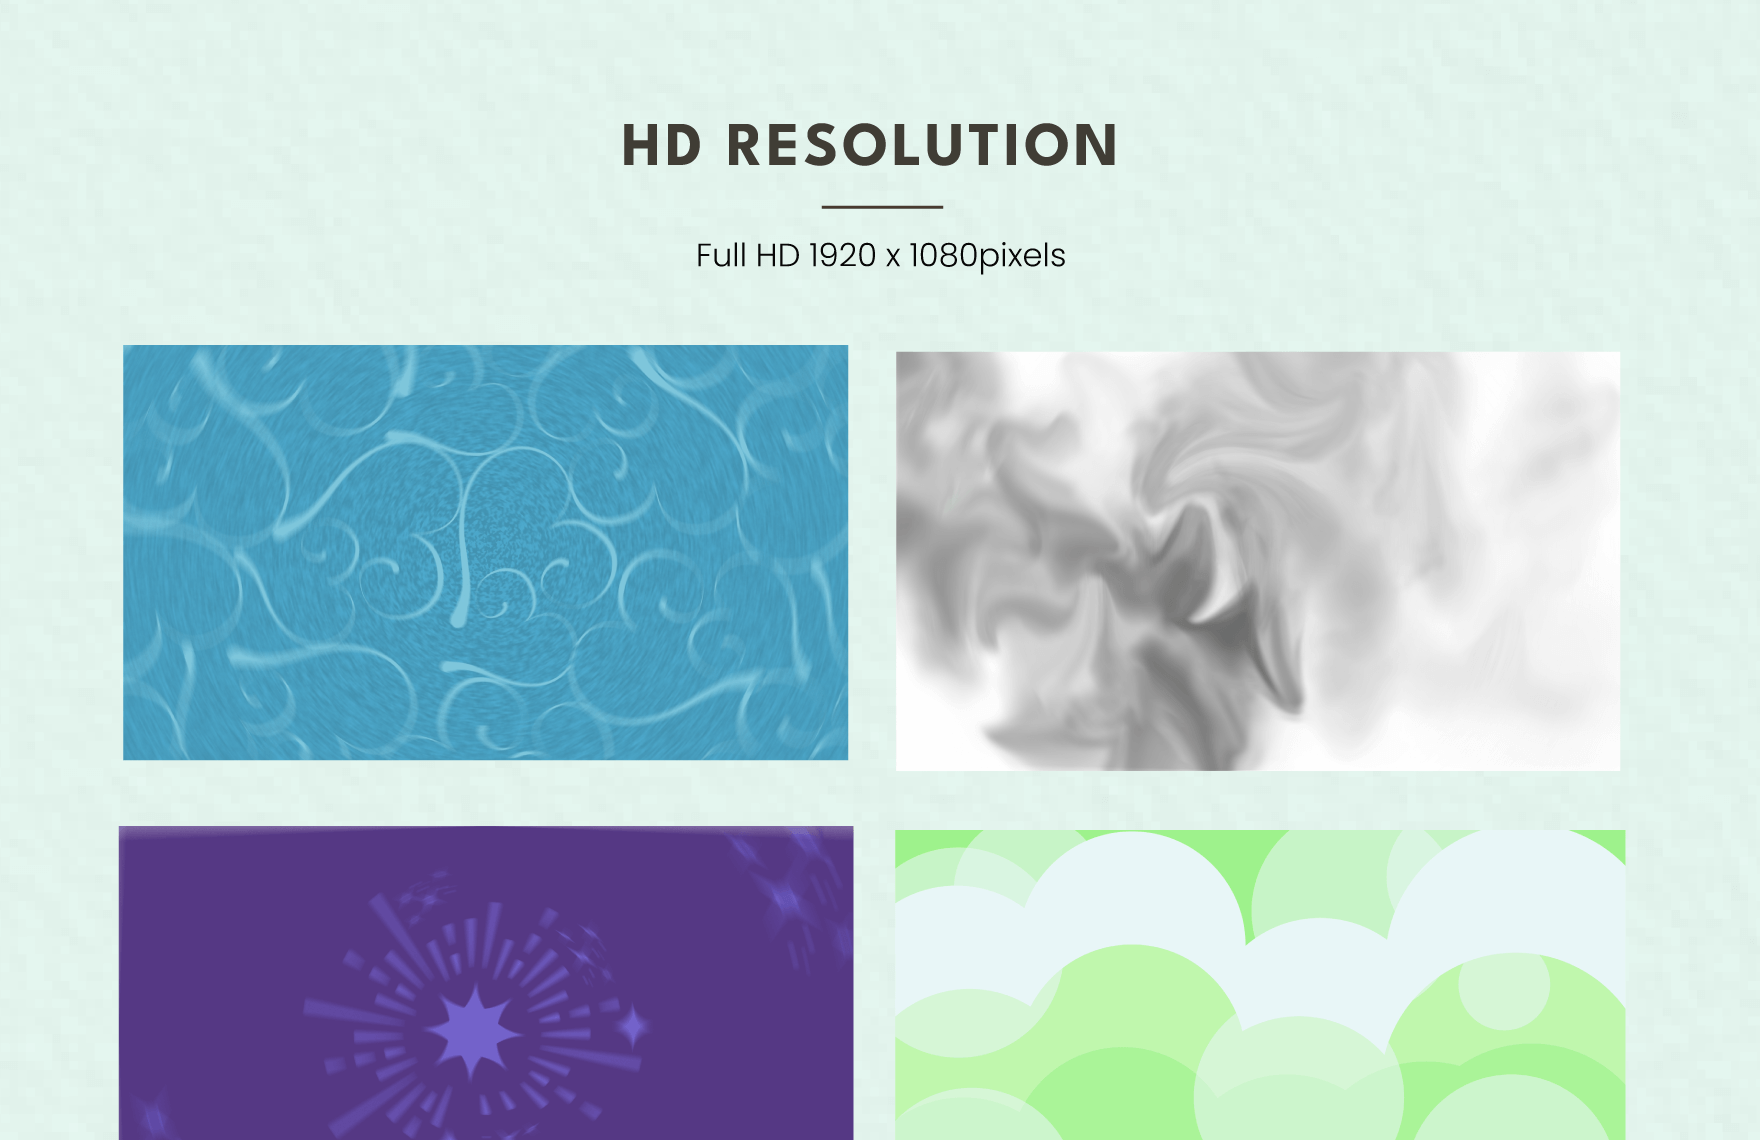 Blurred Background Template